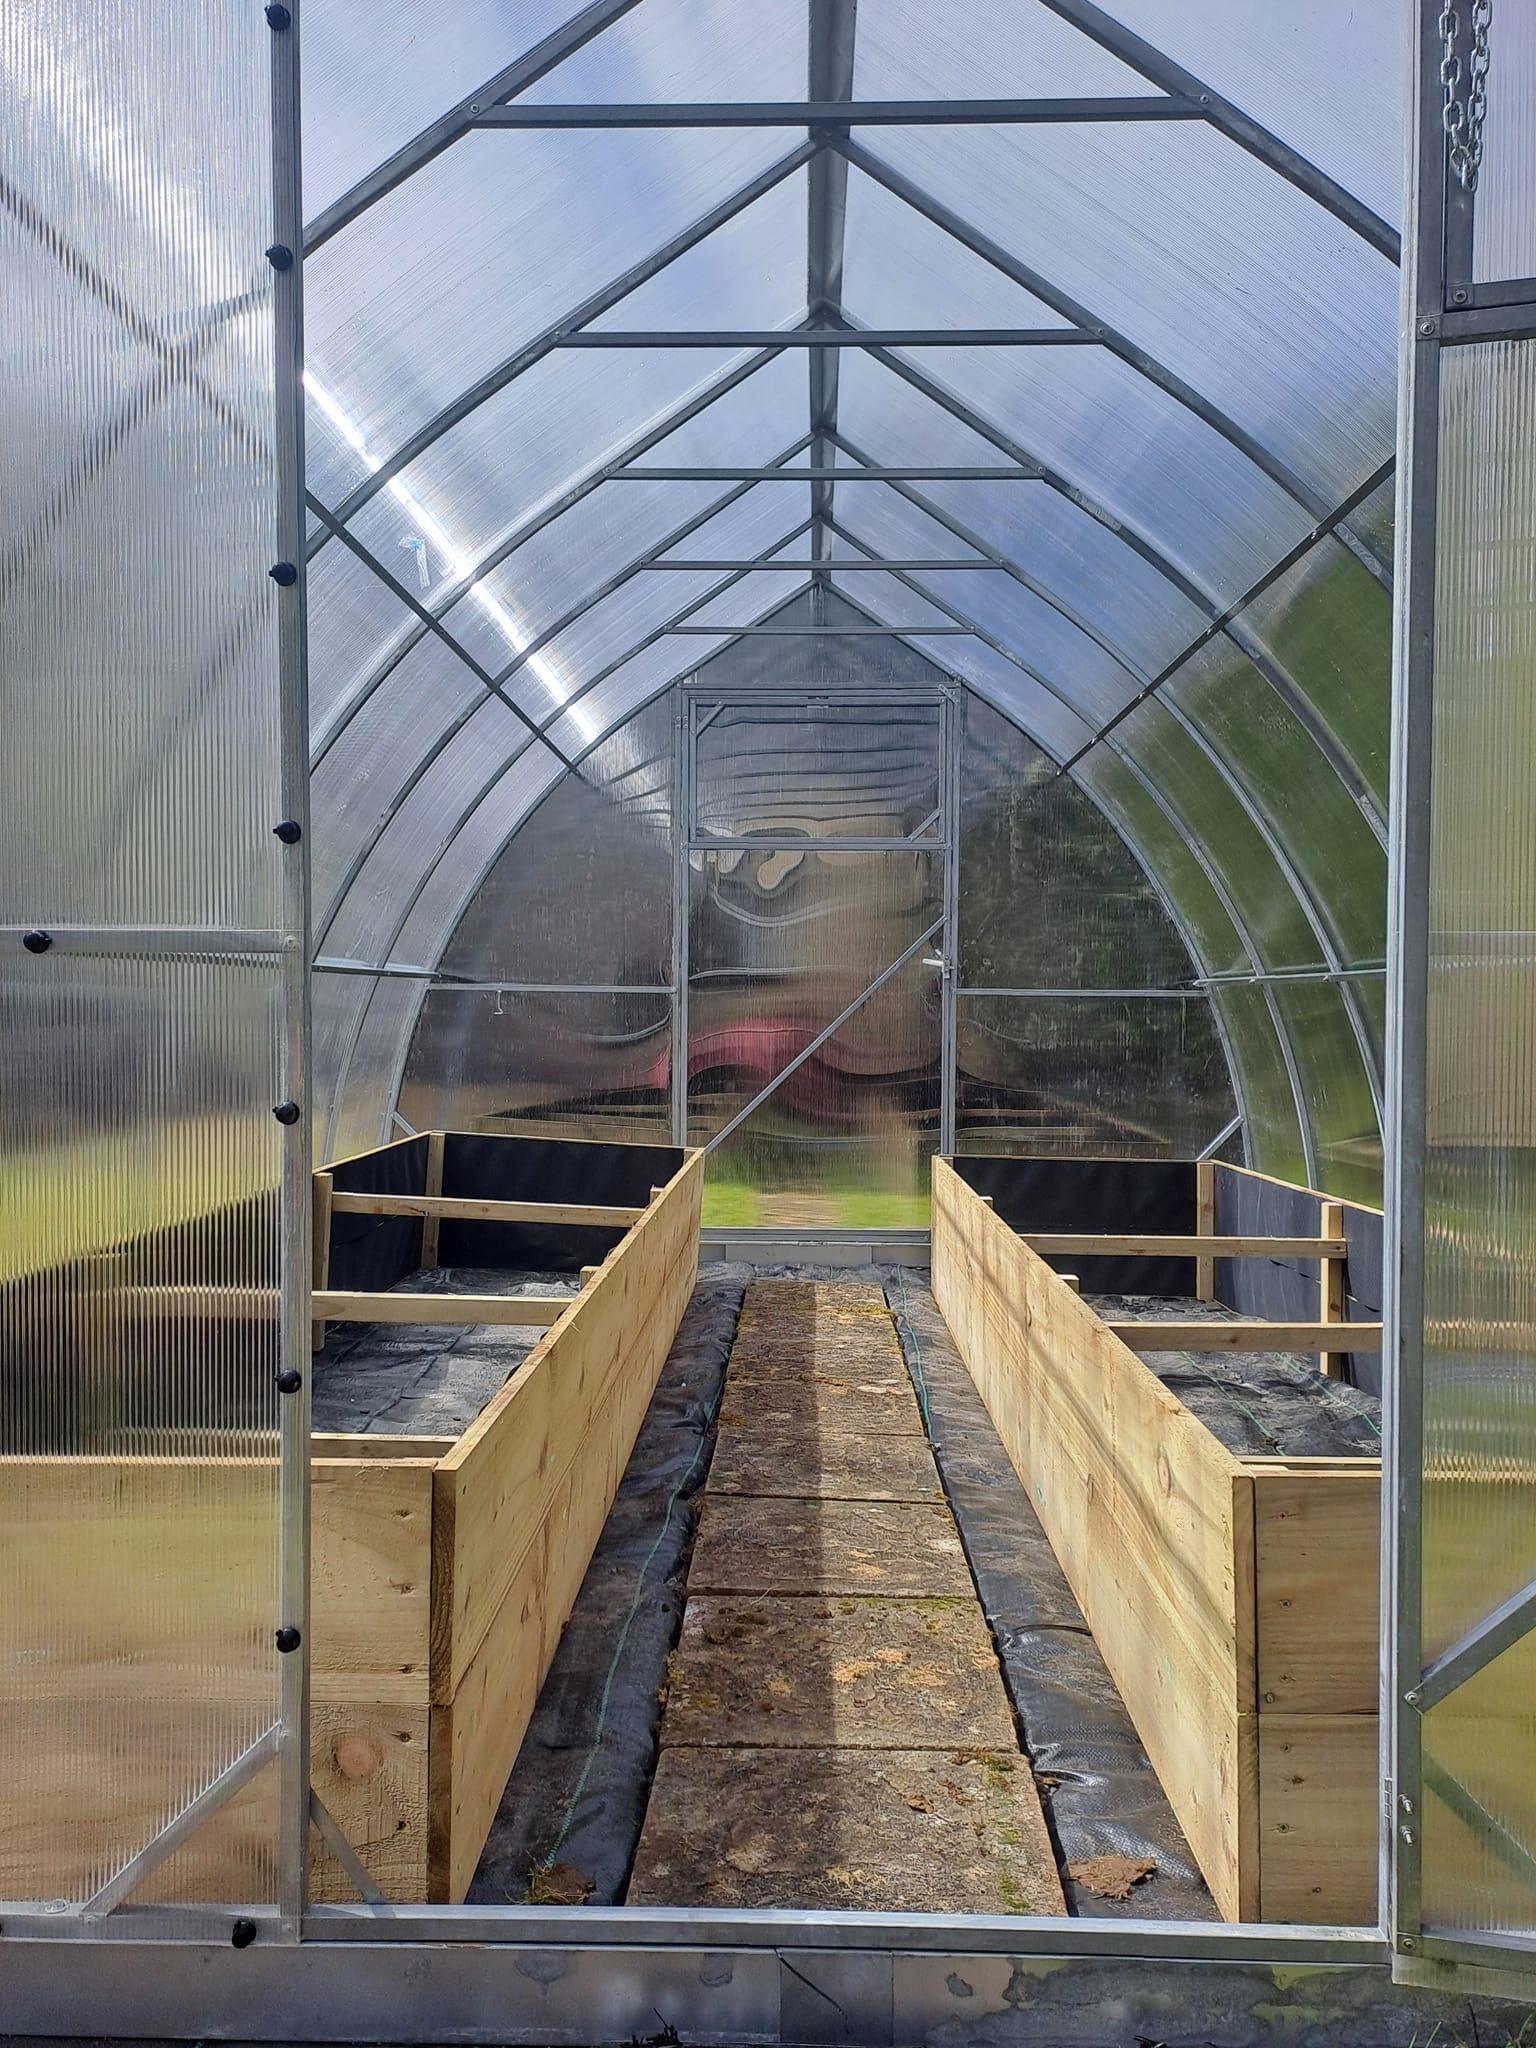 THE ARIANA - POLYCARBONATE GREENHOUSE 3M X 4M (9.8FT X 13FT) 12M² - Keane Gardens